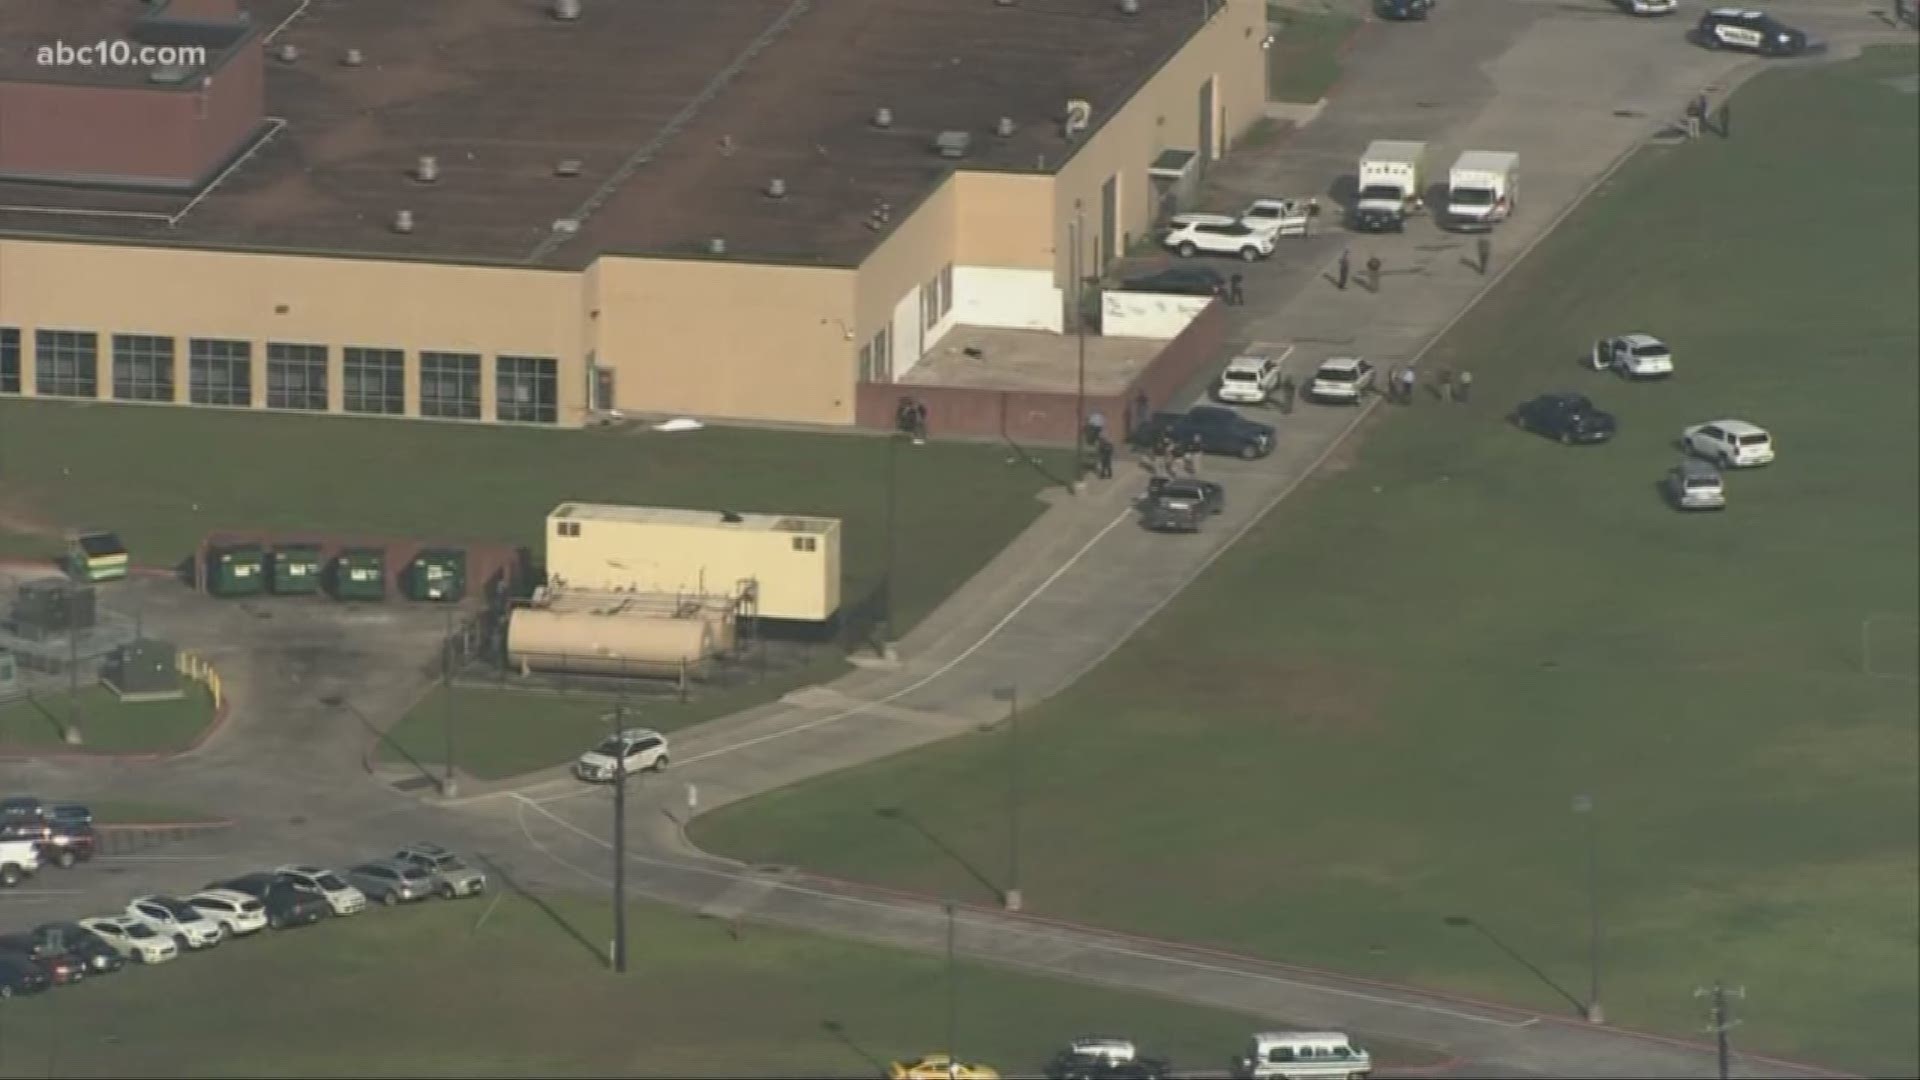 Law enforcement officers are responding to an active shooter at high school southeast of Houston.